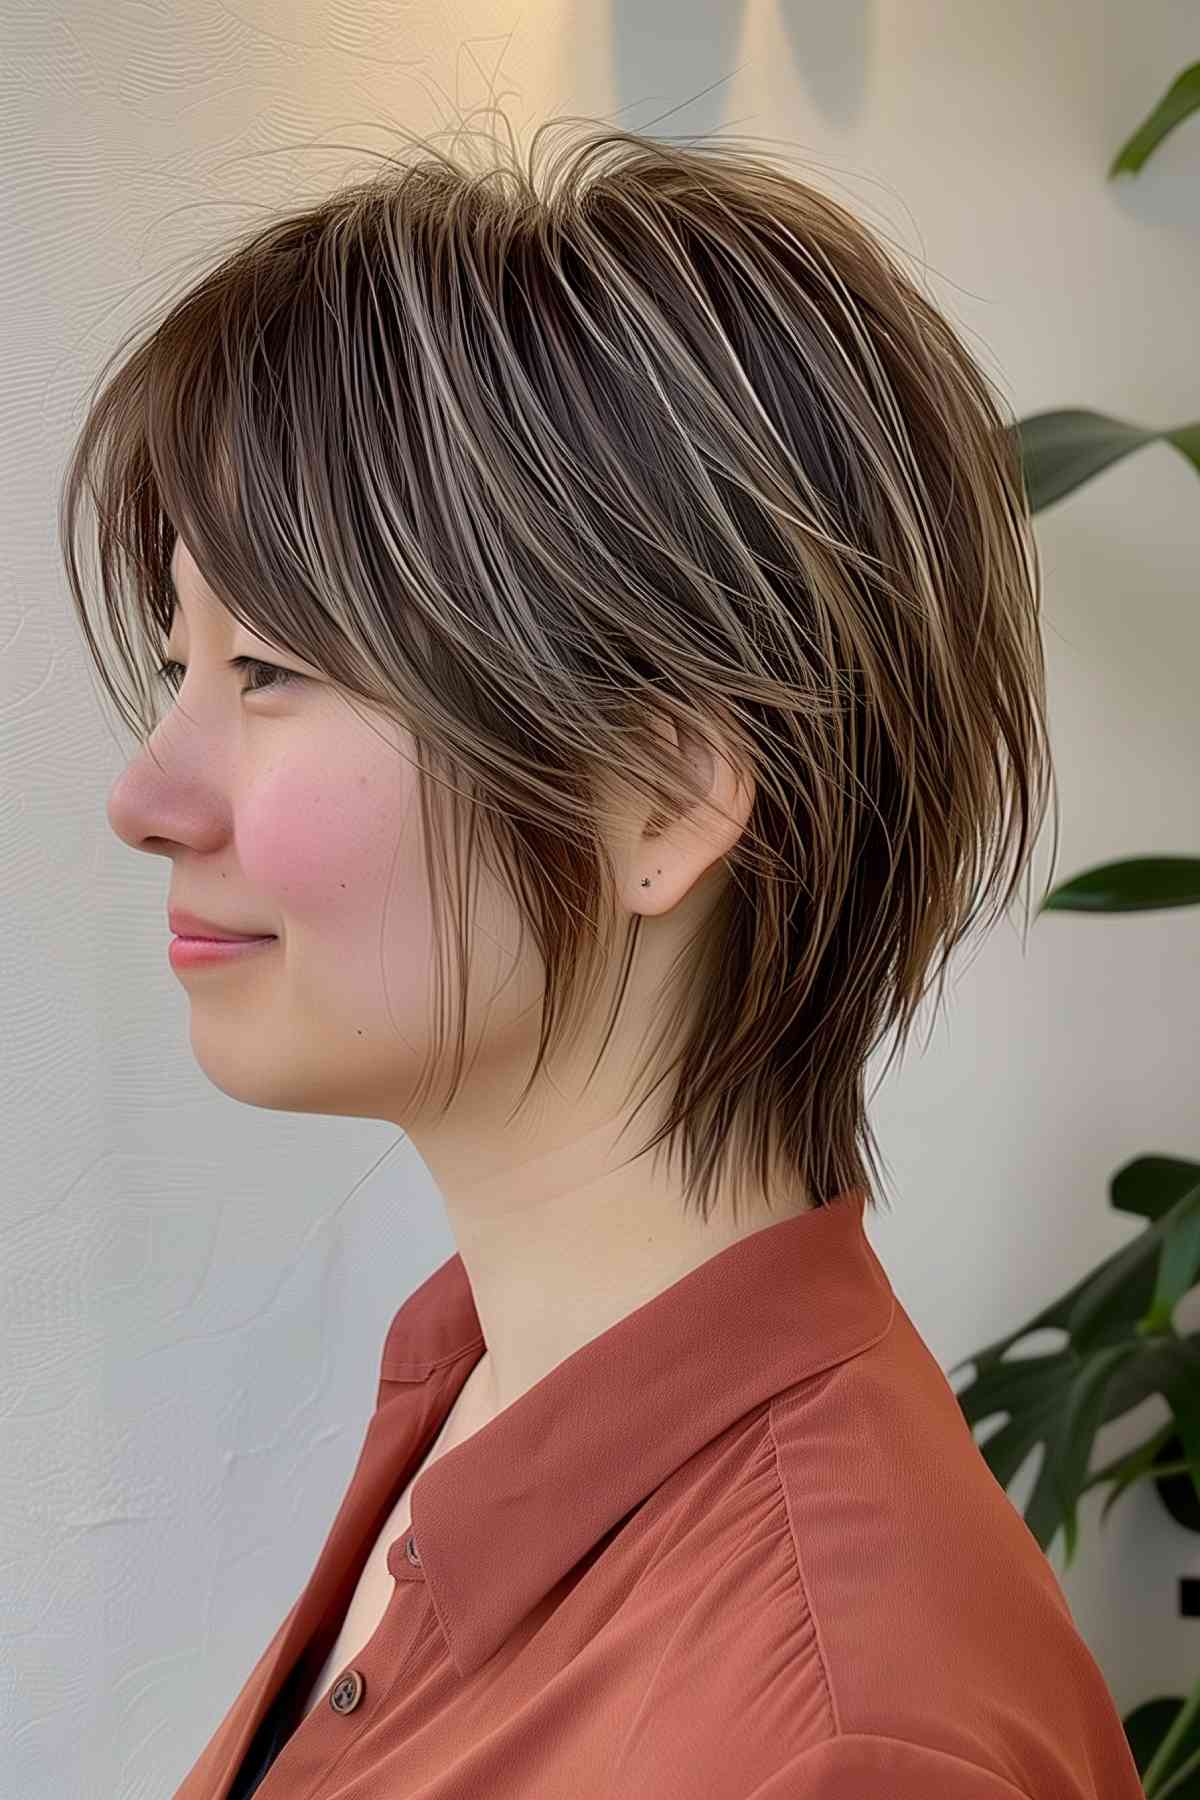 Side view of a woman with a short Wolf Cut in straight hair, showcasing blended layers and a natural brown color against a light background.